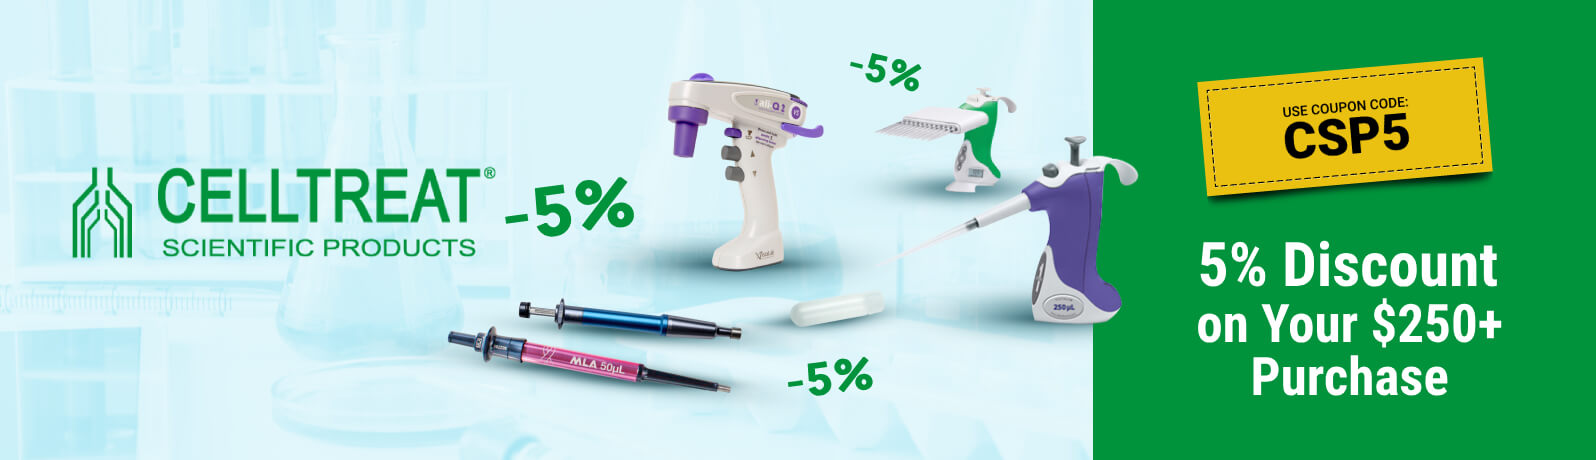 Get a 5% Discount On Your Purchase of Selected CELLTREAT Products of $250 or more!